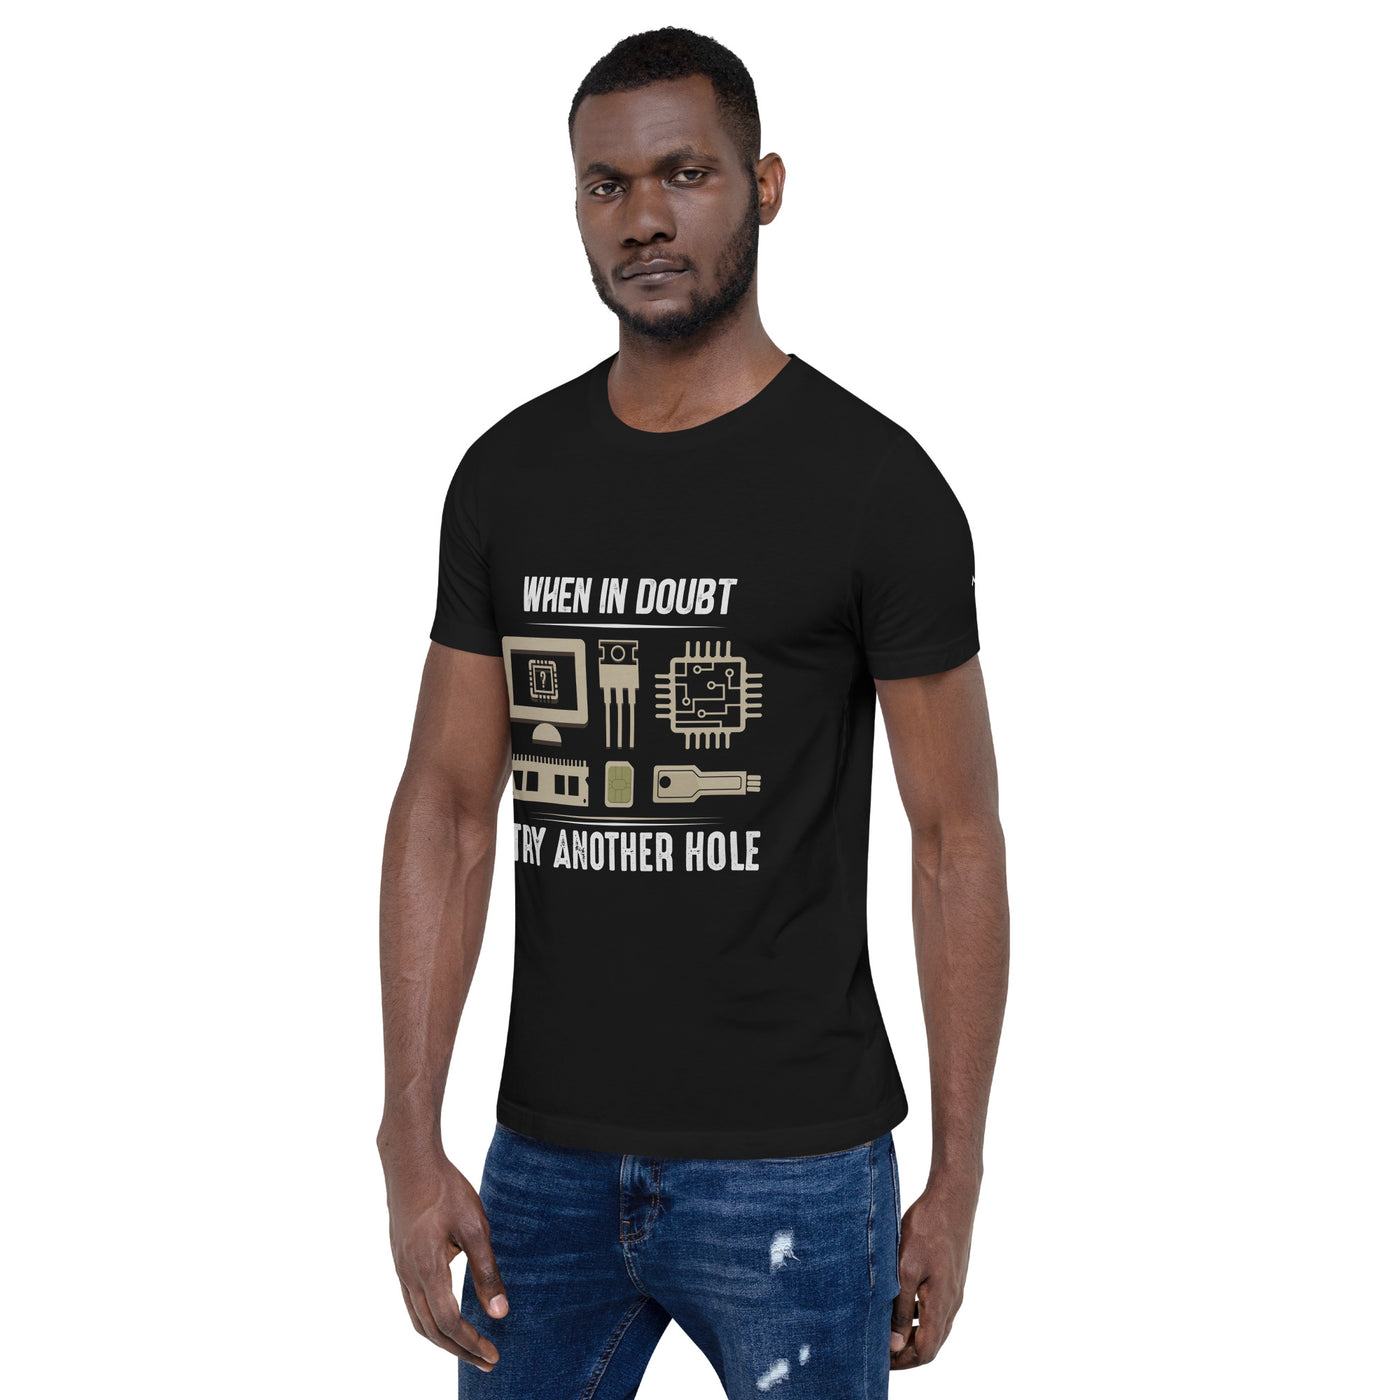 When in doubt, Try another hole V1 - Unisex t-shirt